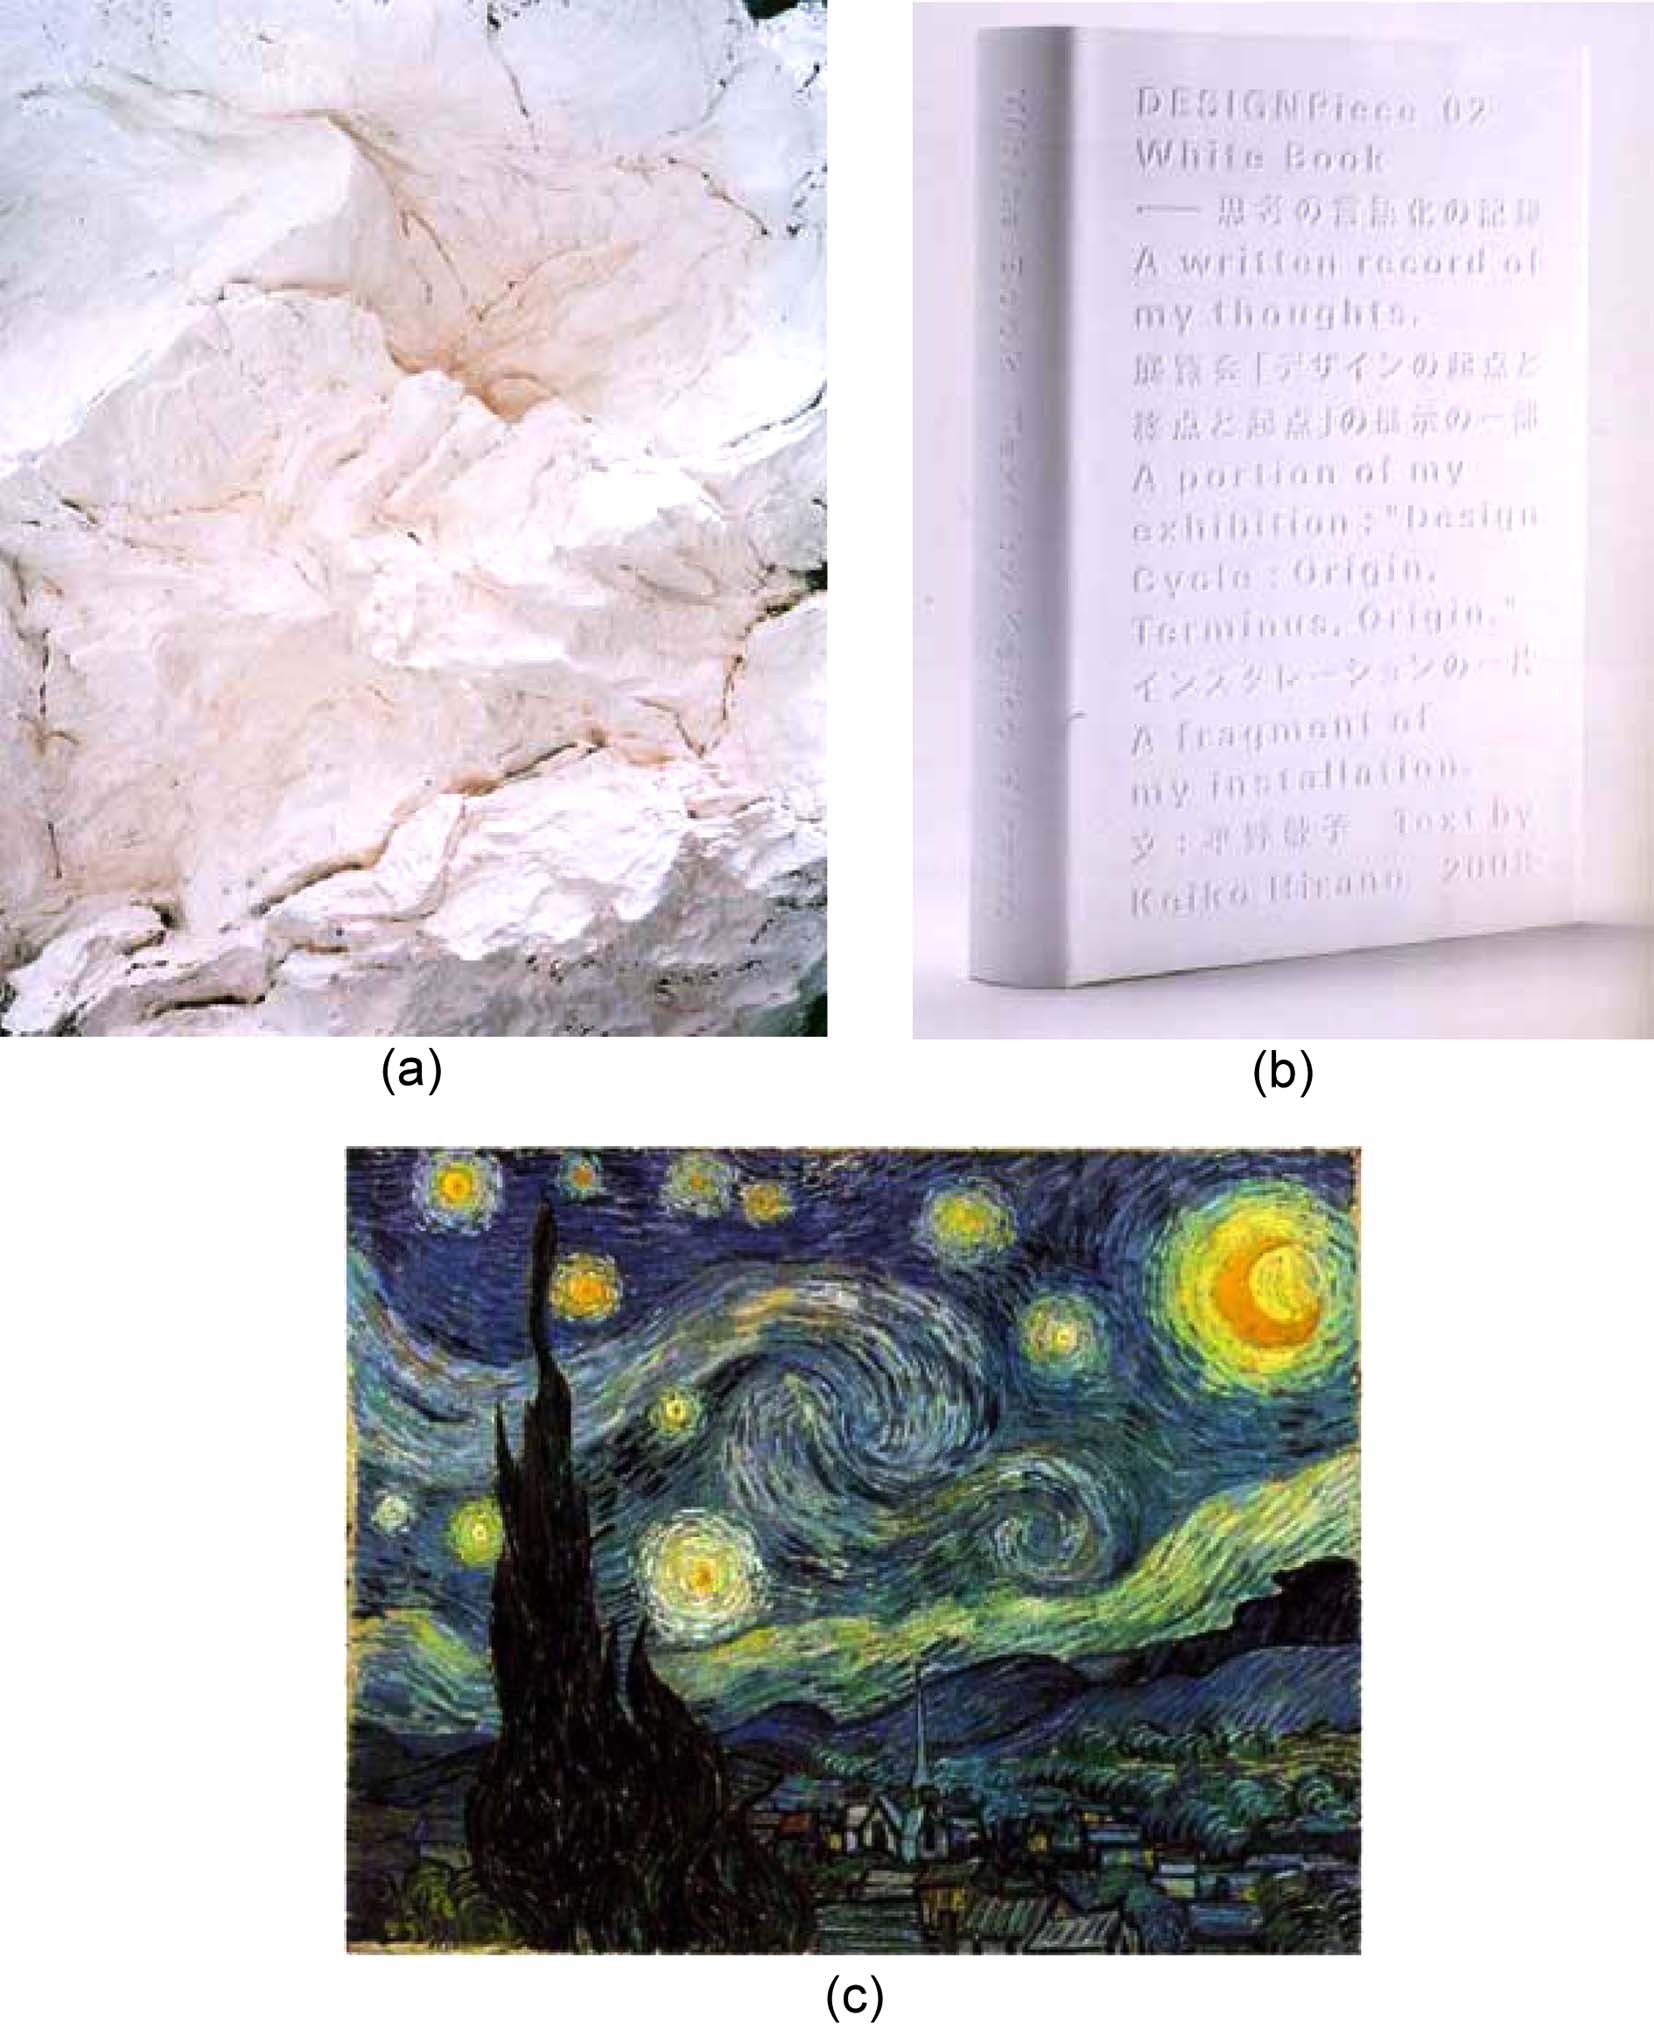 Tactile texture. (a) Tactile texture of material, Chalk, B. Brunner, 2009. www.boltelang.com, (b) Texture of a book cover. Design Texture: Unique Materials and Finishes for Graphic Design, (c) Texture by brush strokes. Starry Night, V. van Gogh, 1889. www.vangoghgallery.com.